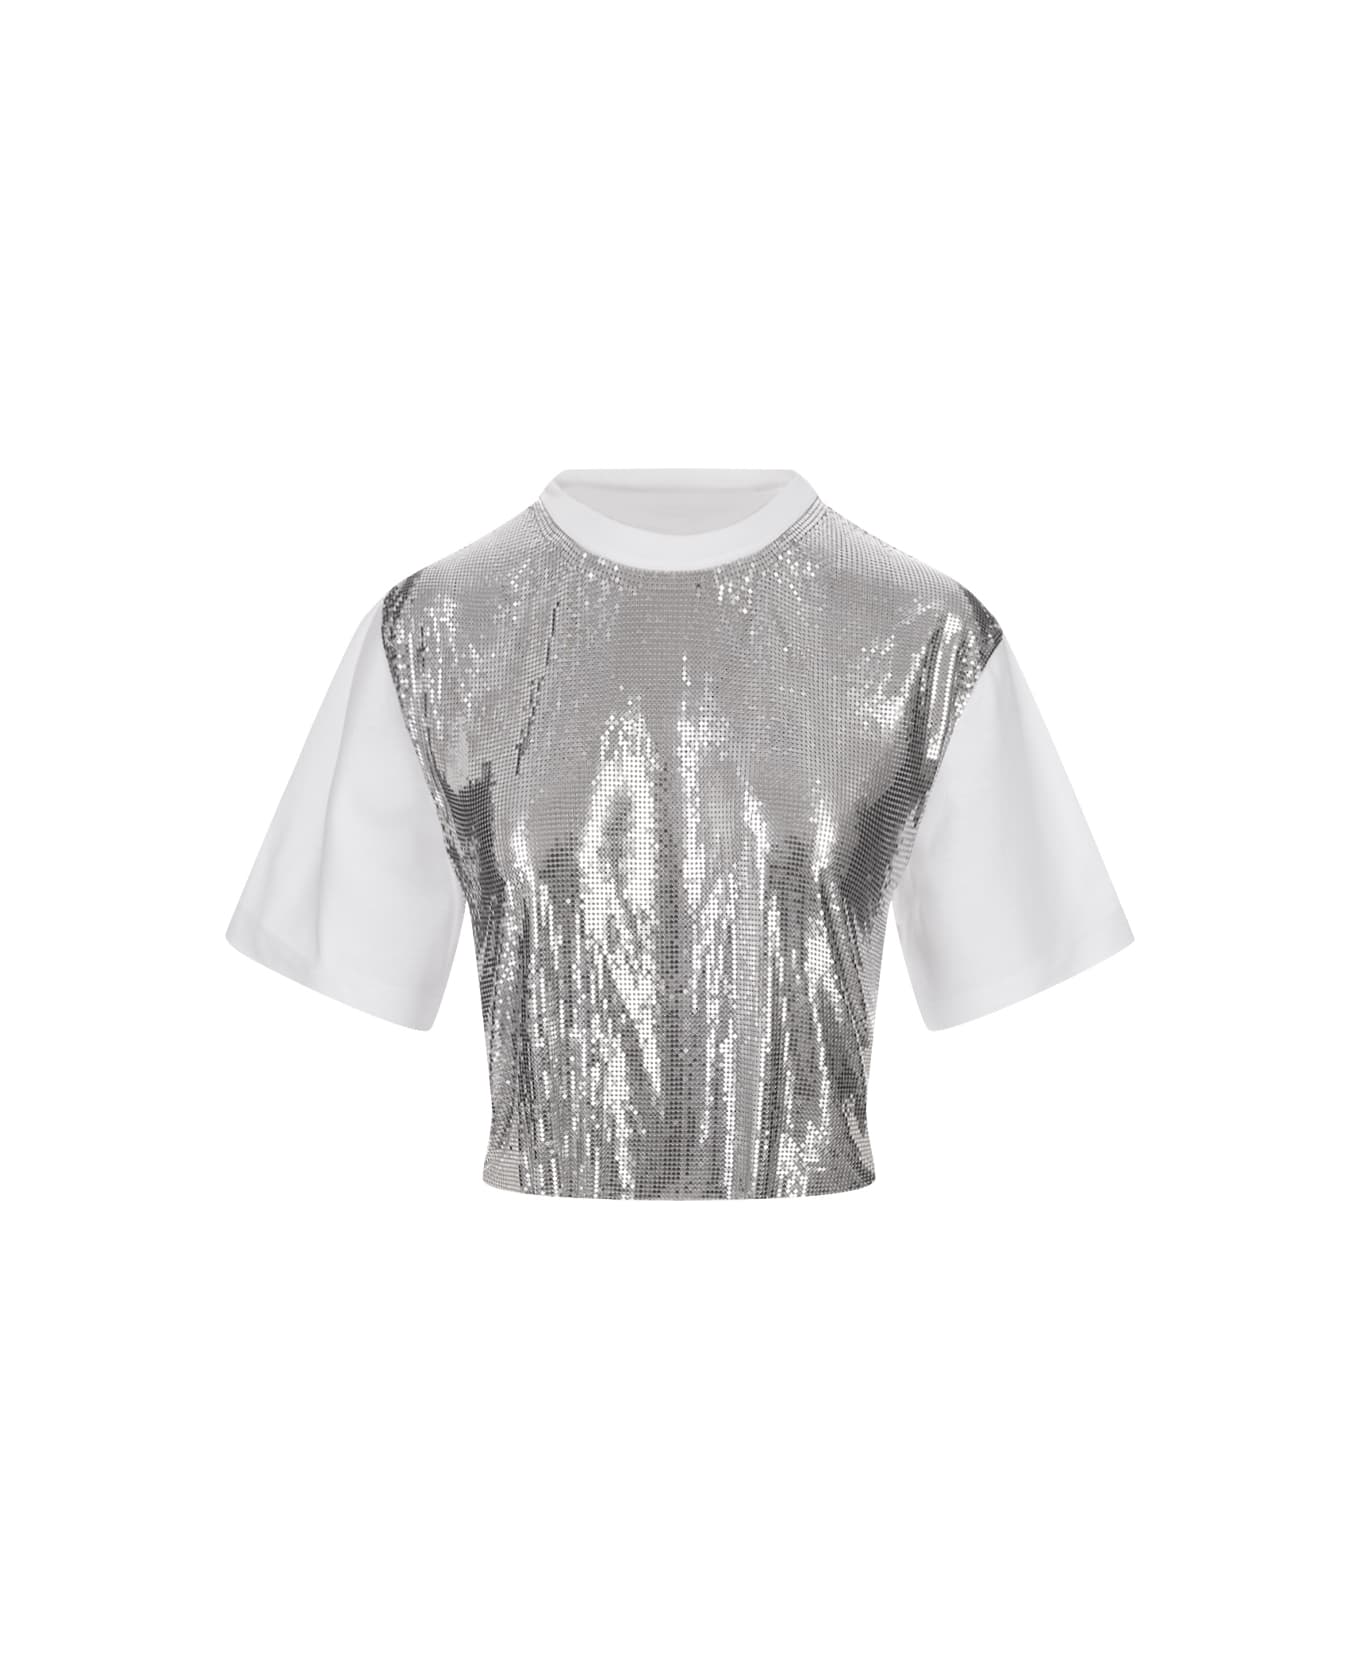 Paco Rabanne White Short T-shirt With Silver Mesh Panel - ARGENTO